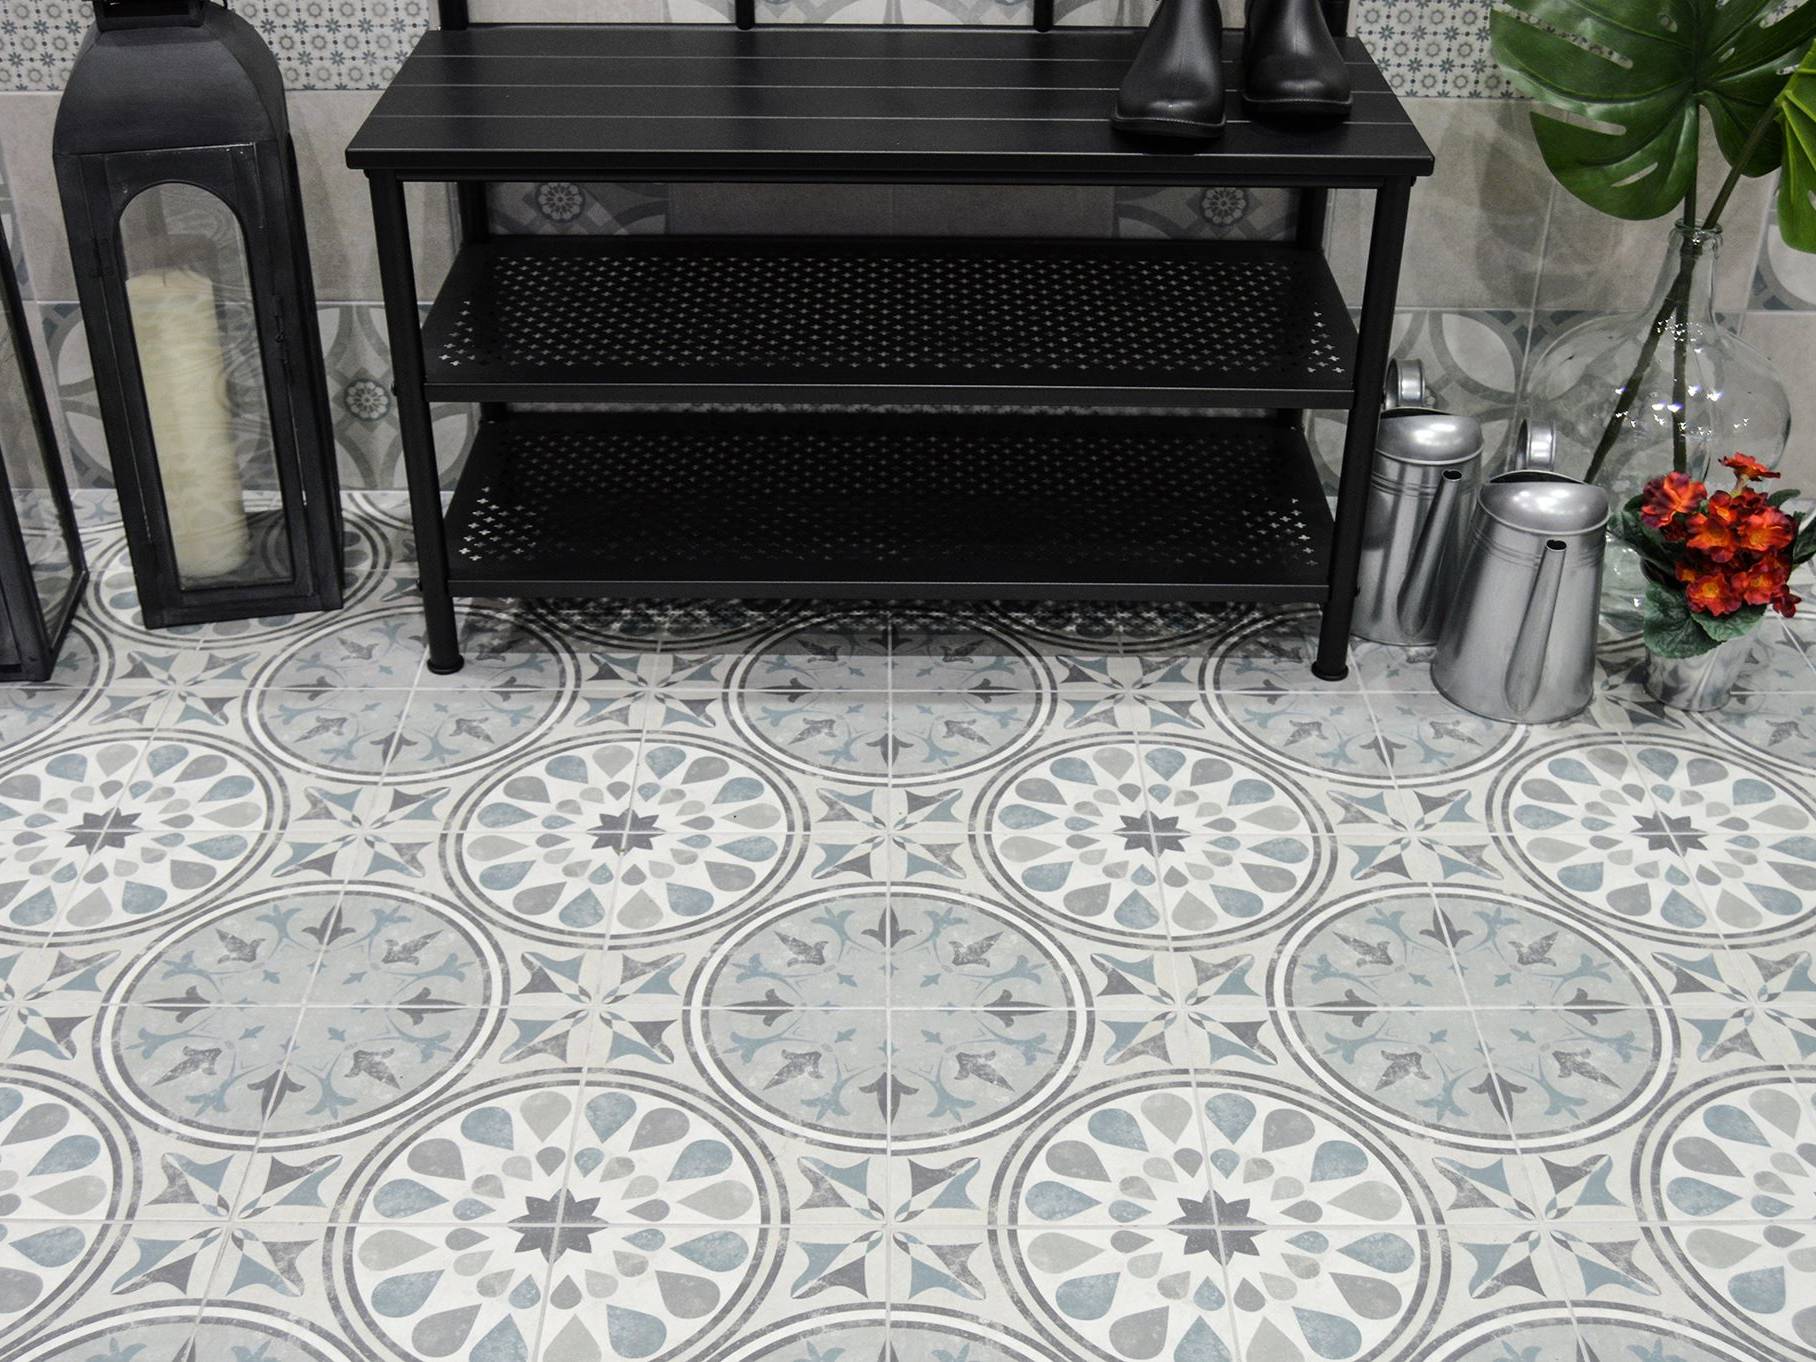 Tapestry Palma 9x9 | Mohawk Tile and Marble